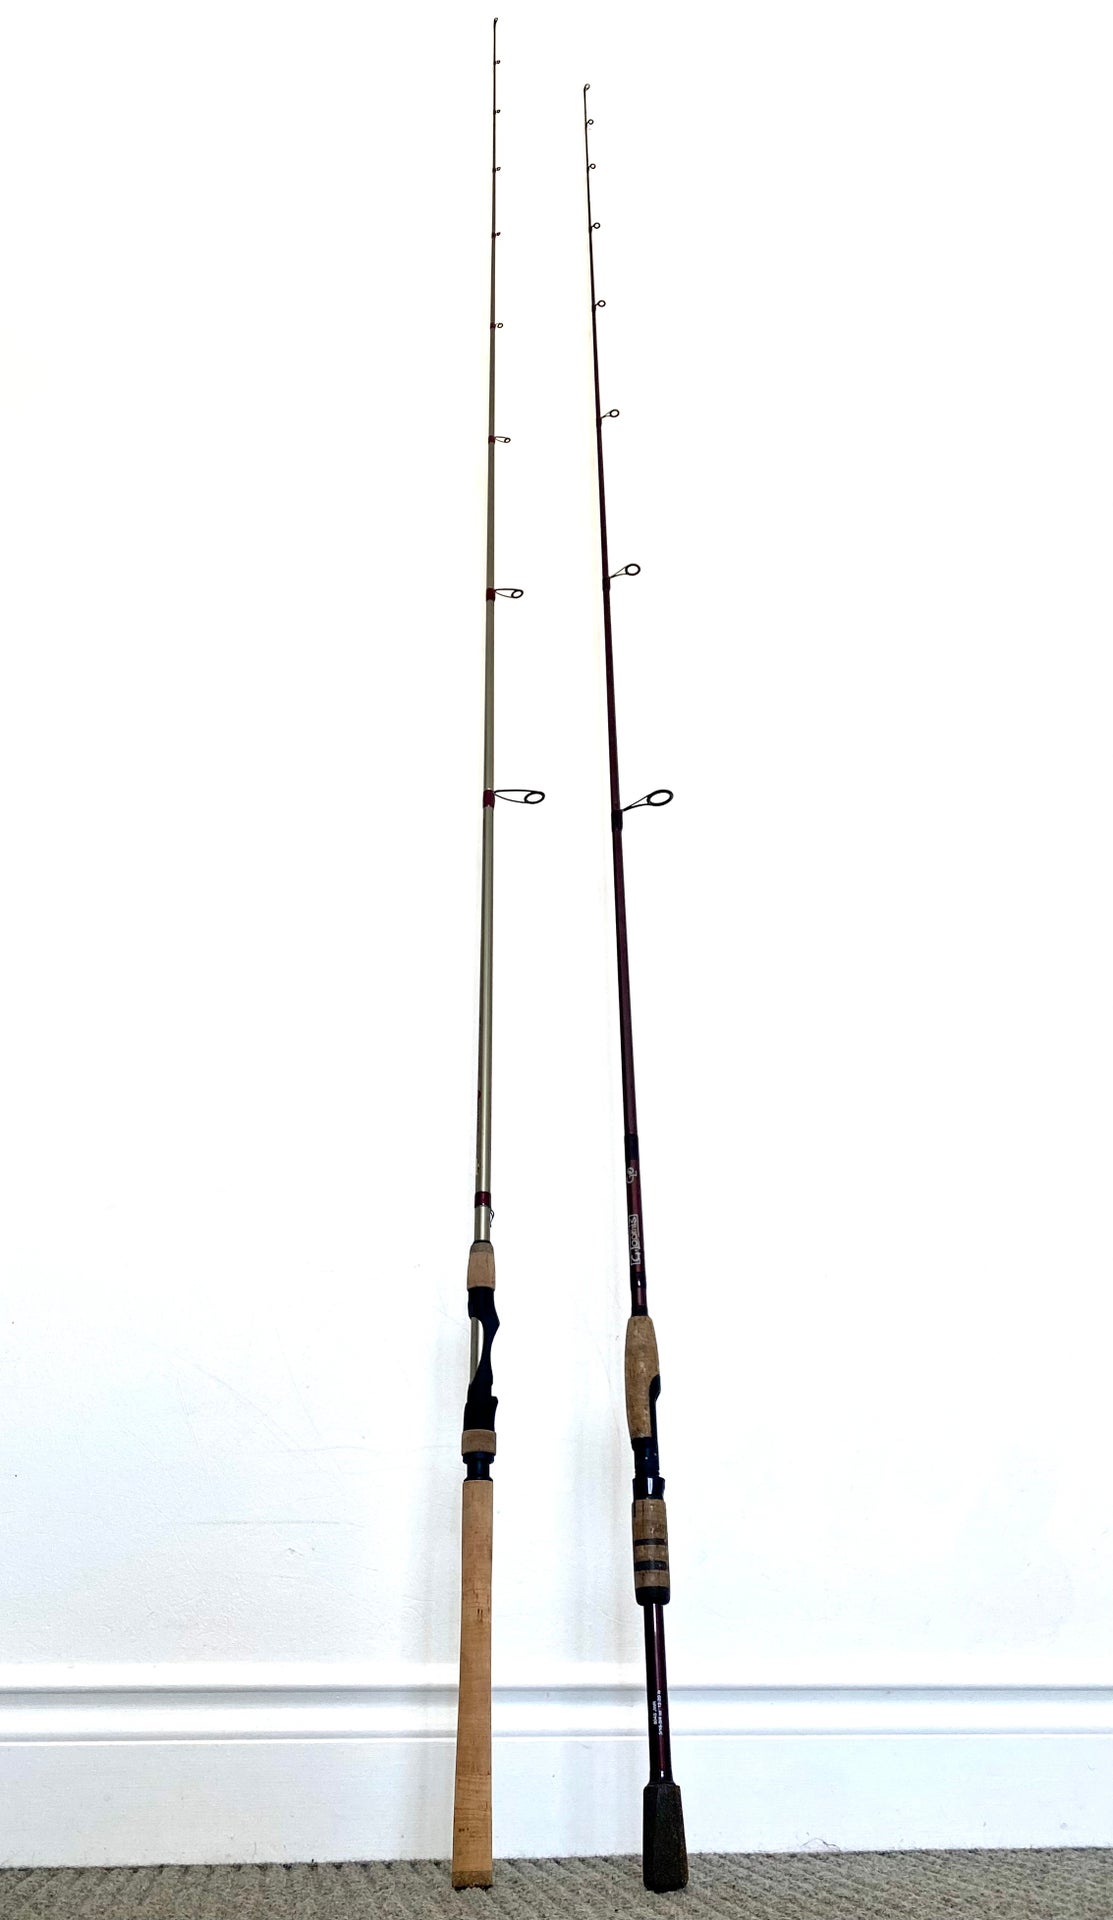 G Loomis G2/Femwick Techna PX Fishing Spinning Rods for sale